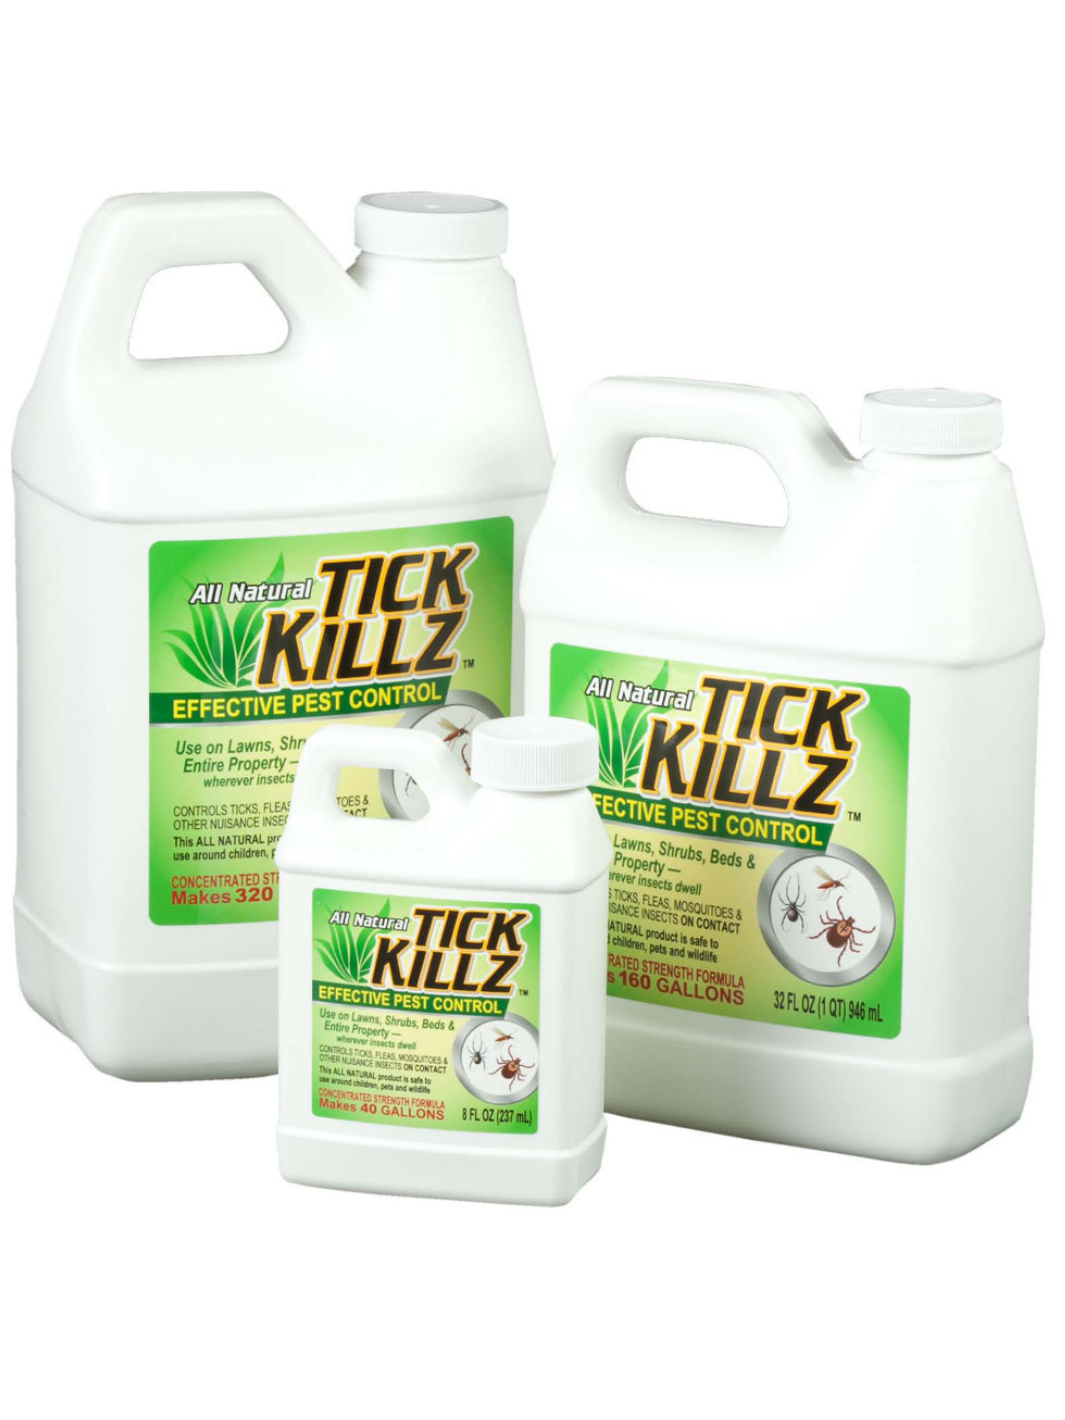 Tick Killz All Natural Effective Pest Control in Three Sizes